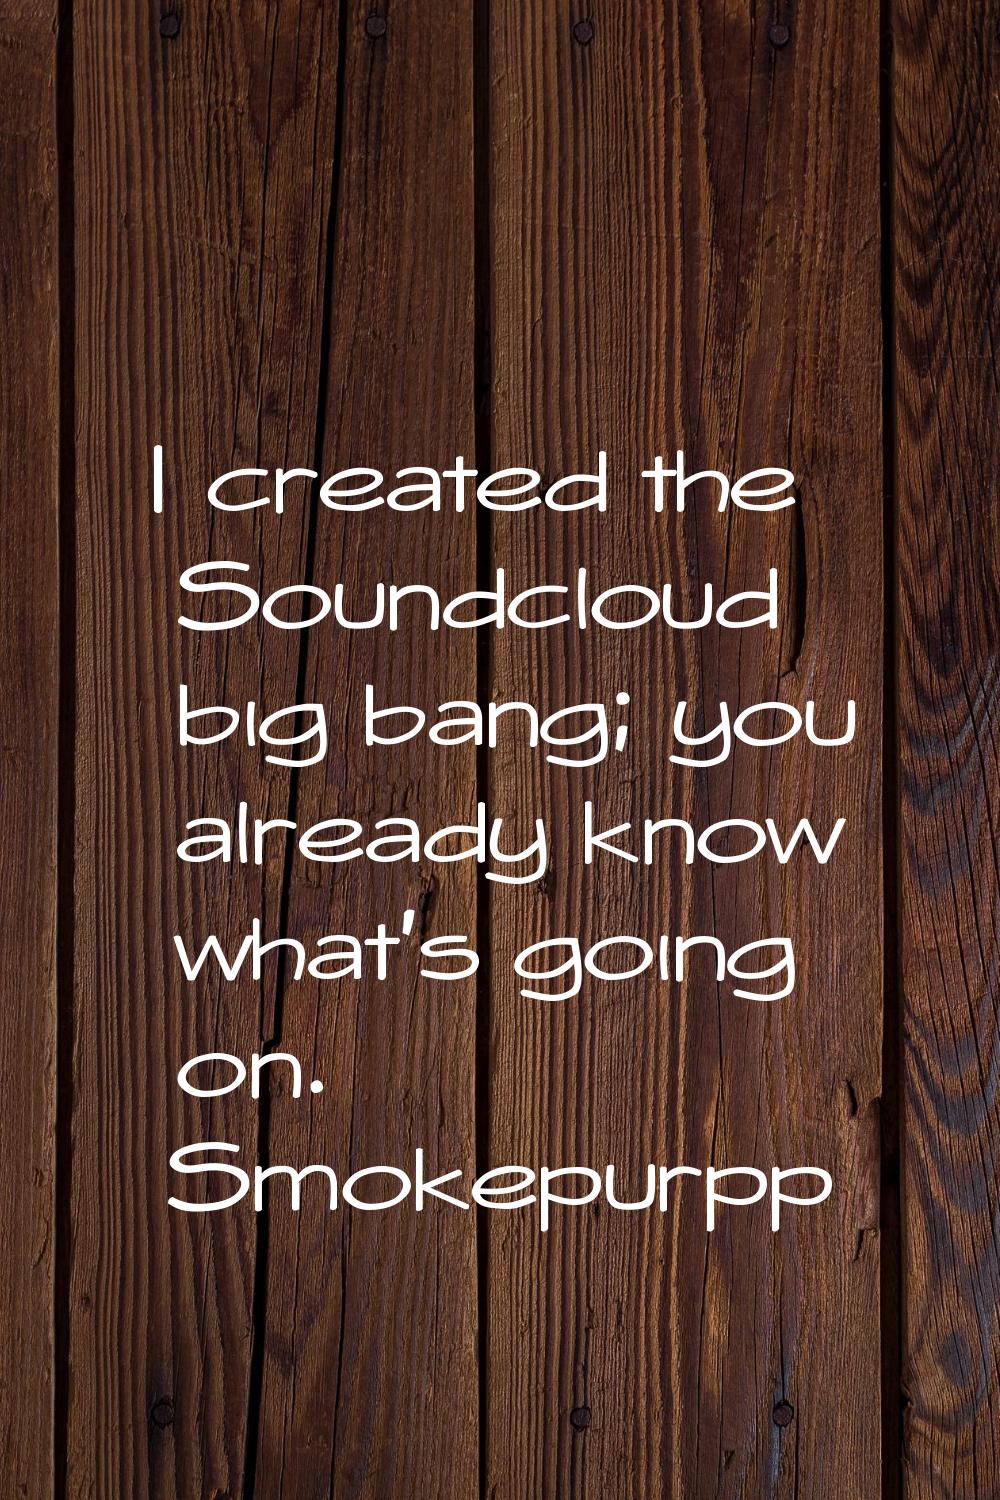 I created the Soundcloud big bang; you already know what's going on.